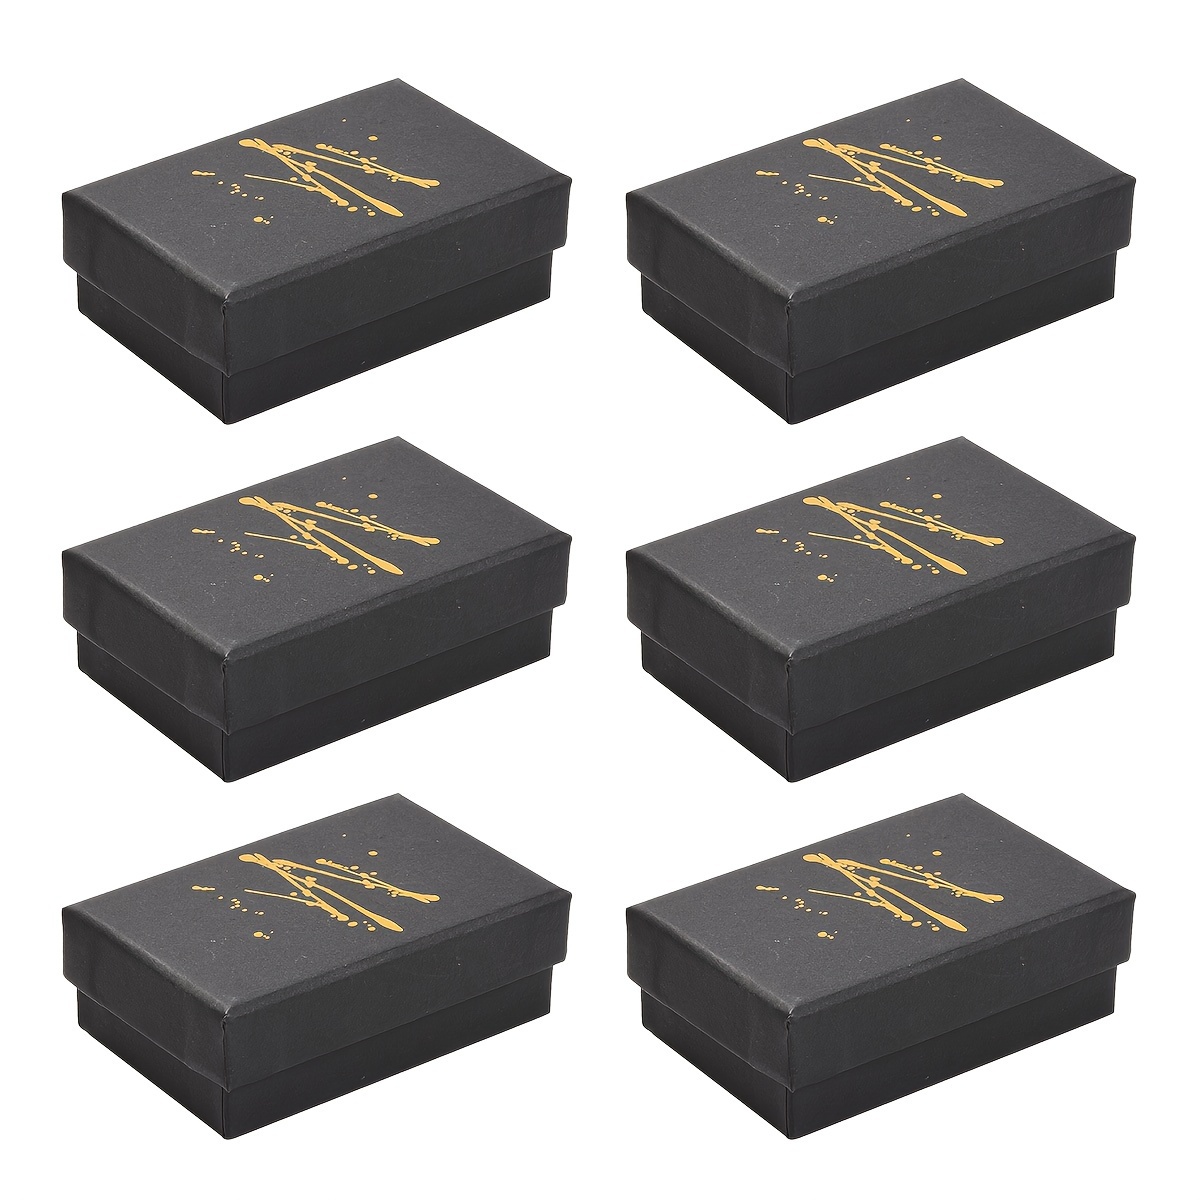 

24pcs Black Hot Stamping Cardboard Jewelry Display Packaging Boxes With Sponge Inside, 8.1x5.2x2.8cm For Valentine's Day Daily Gift Giving Jewelry Decorative Boxes Accessories Small Business Supplies